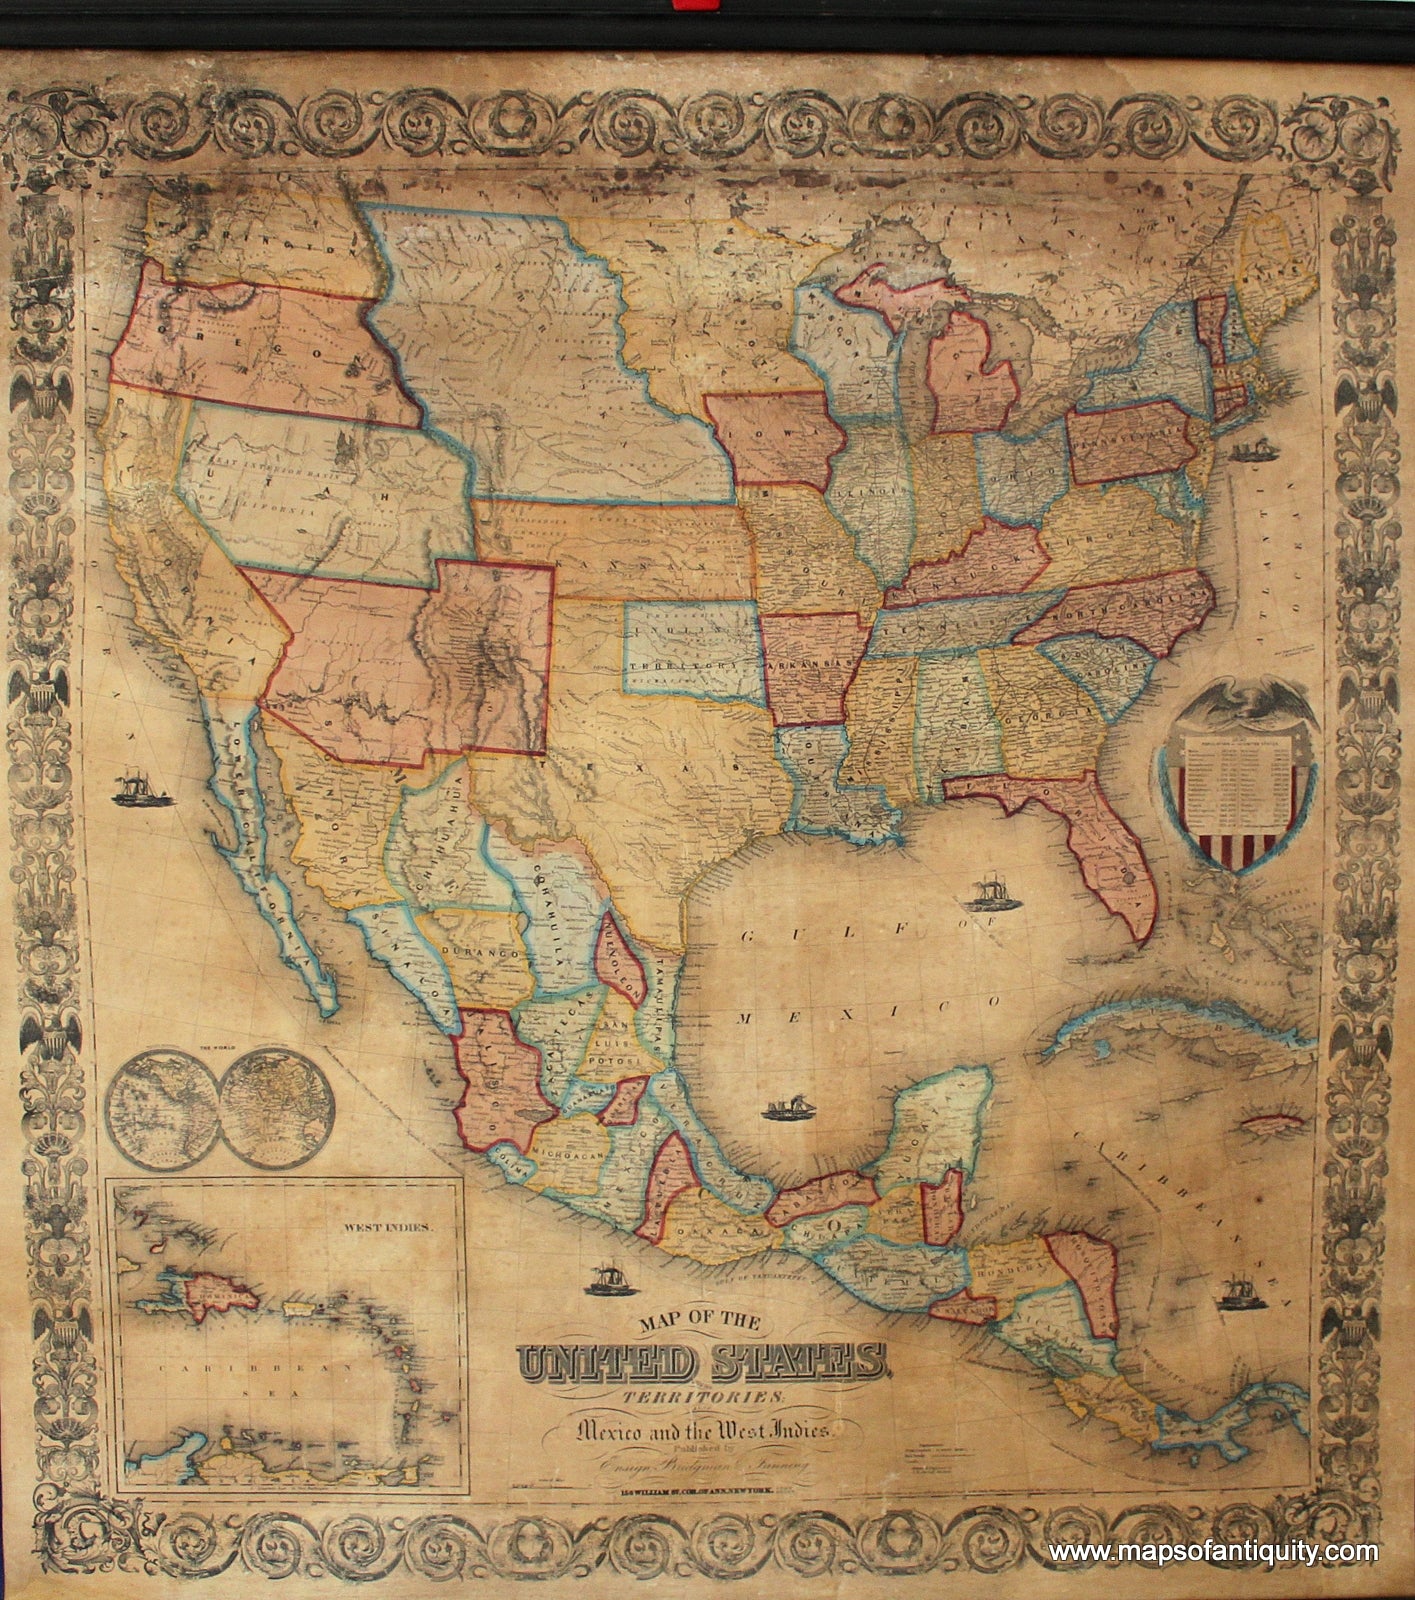 Hand-Colored-Antique-Wall-Map-on-Rods--Map-of-the-United-States-Territories-Mexico-and-the-West-Indies.-******-United-States-General-Mexico-1855-Ensign-Bridgman-and-Fanning-Maps-Of-Antiquity